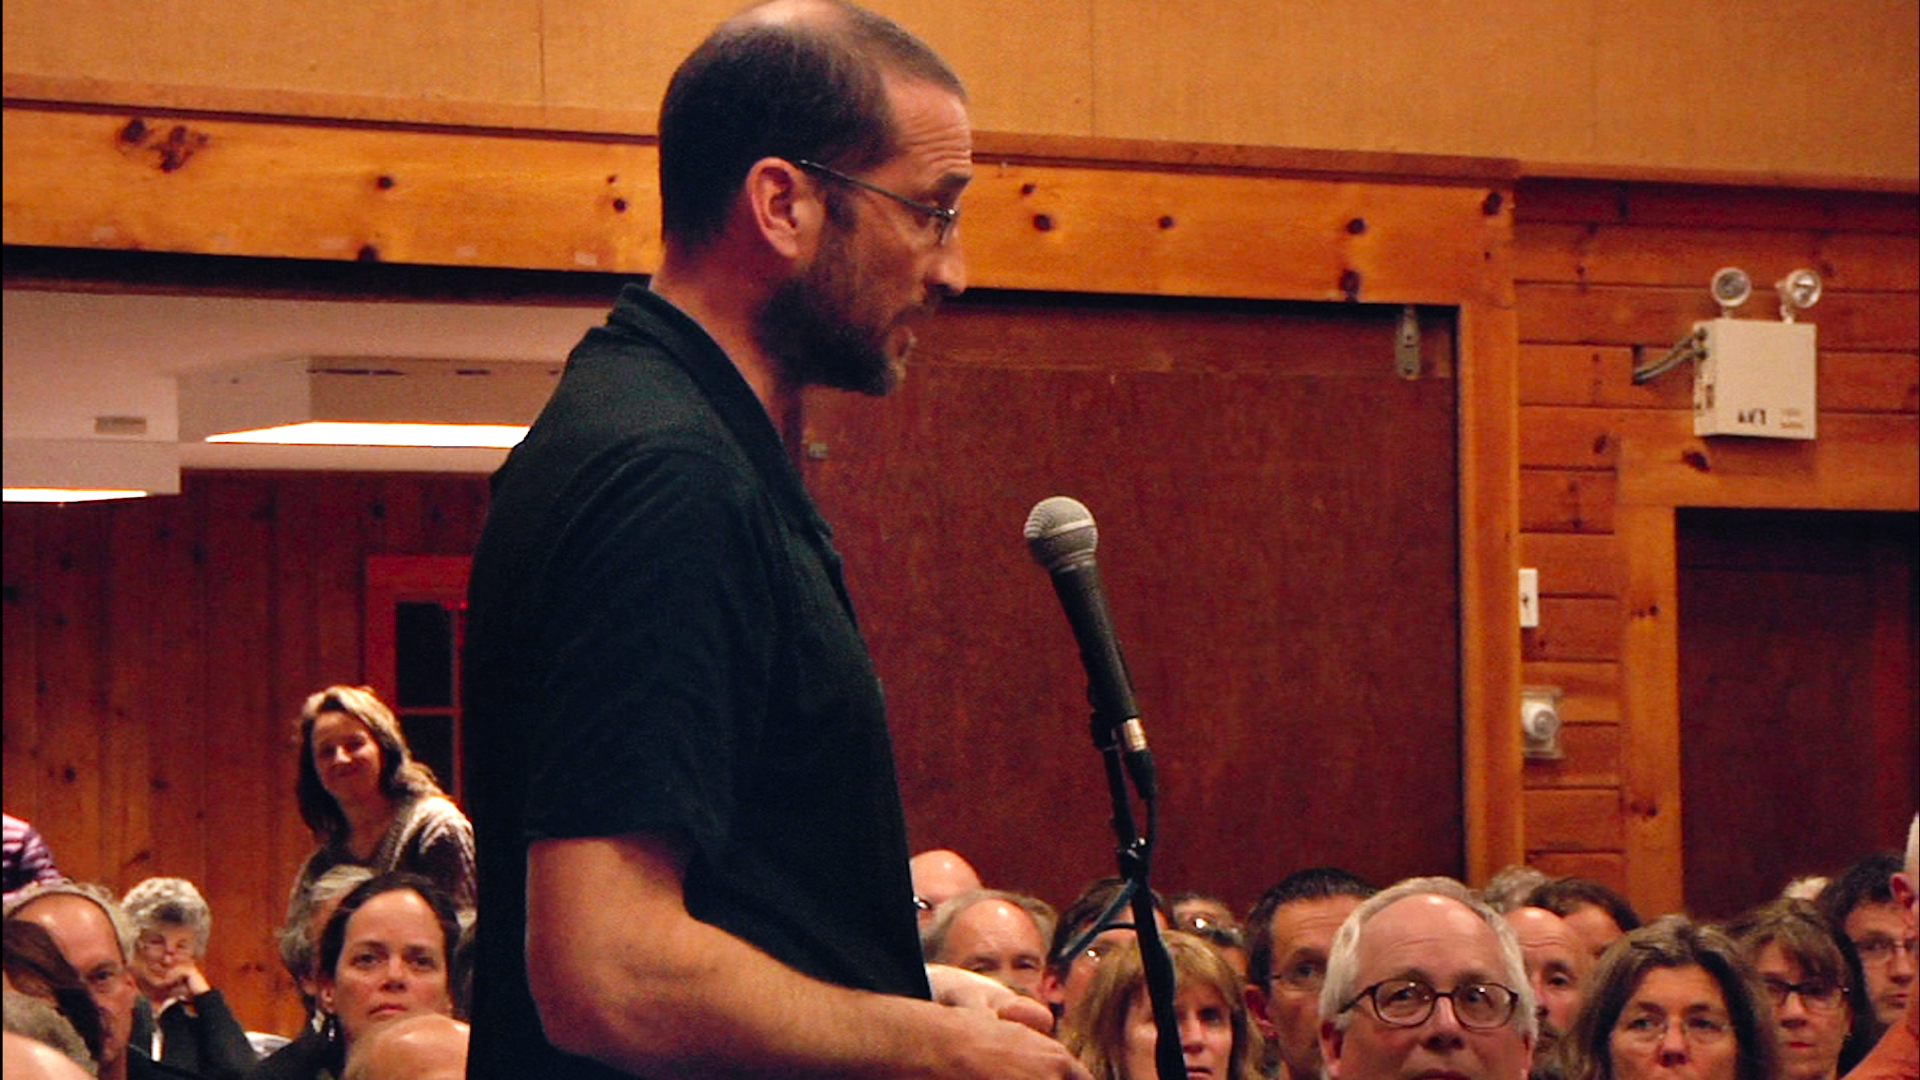 Filmmaker Thomas Bena speaks at Chilmark's town meeting in support of a bylaw limiting house size